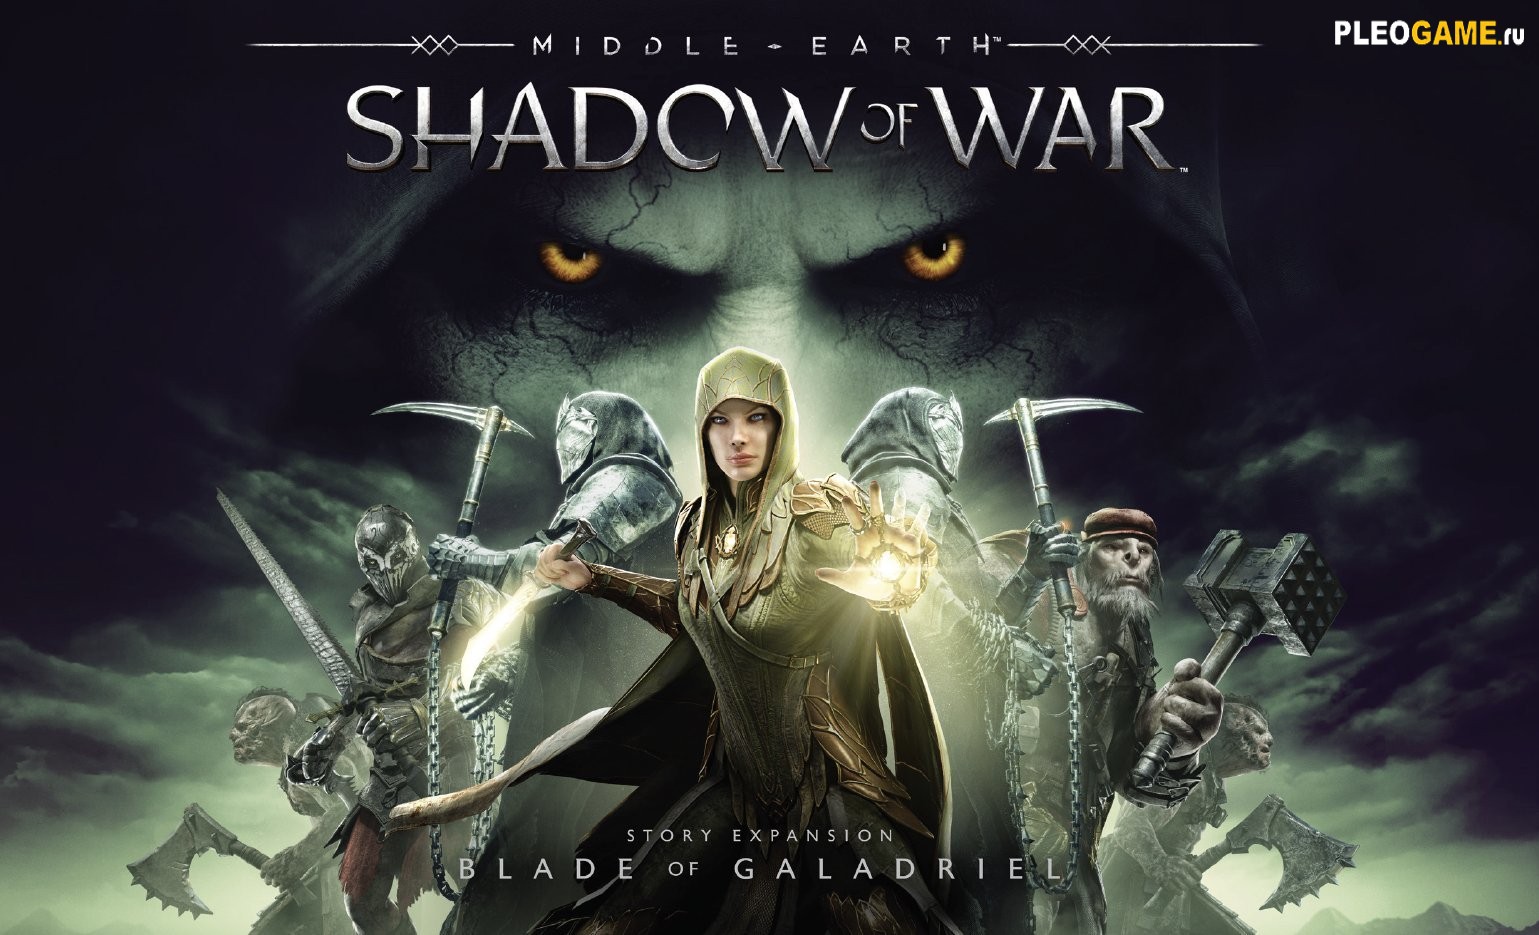  1.11  Middle-earth: Shadow of War + DLC The Blade of Galadriel